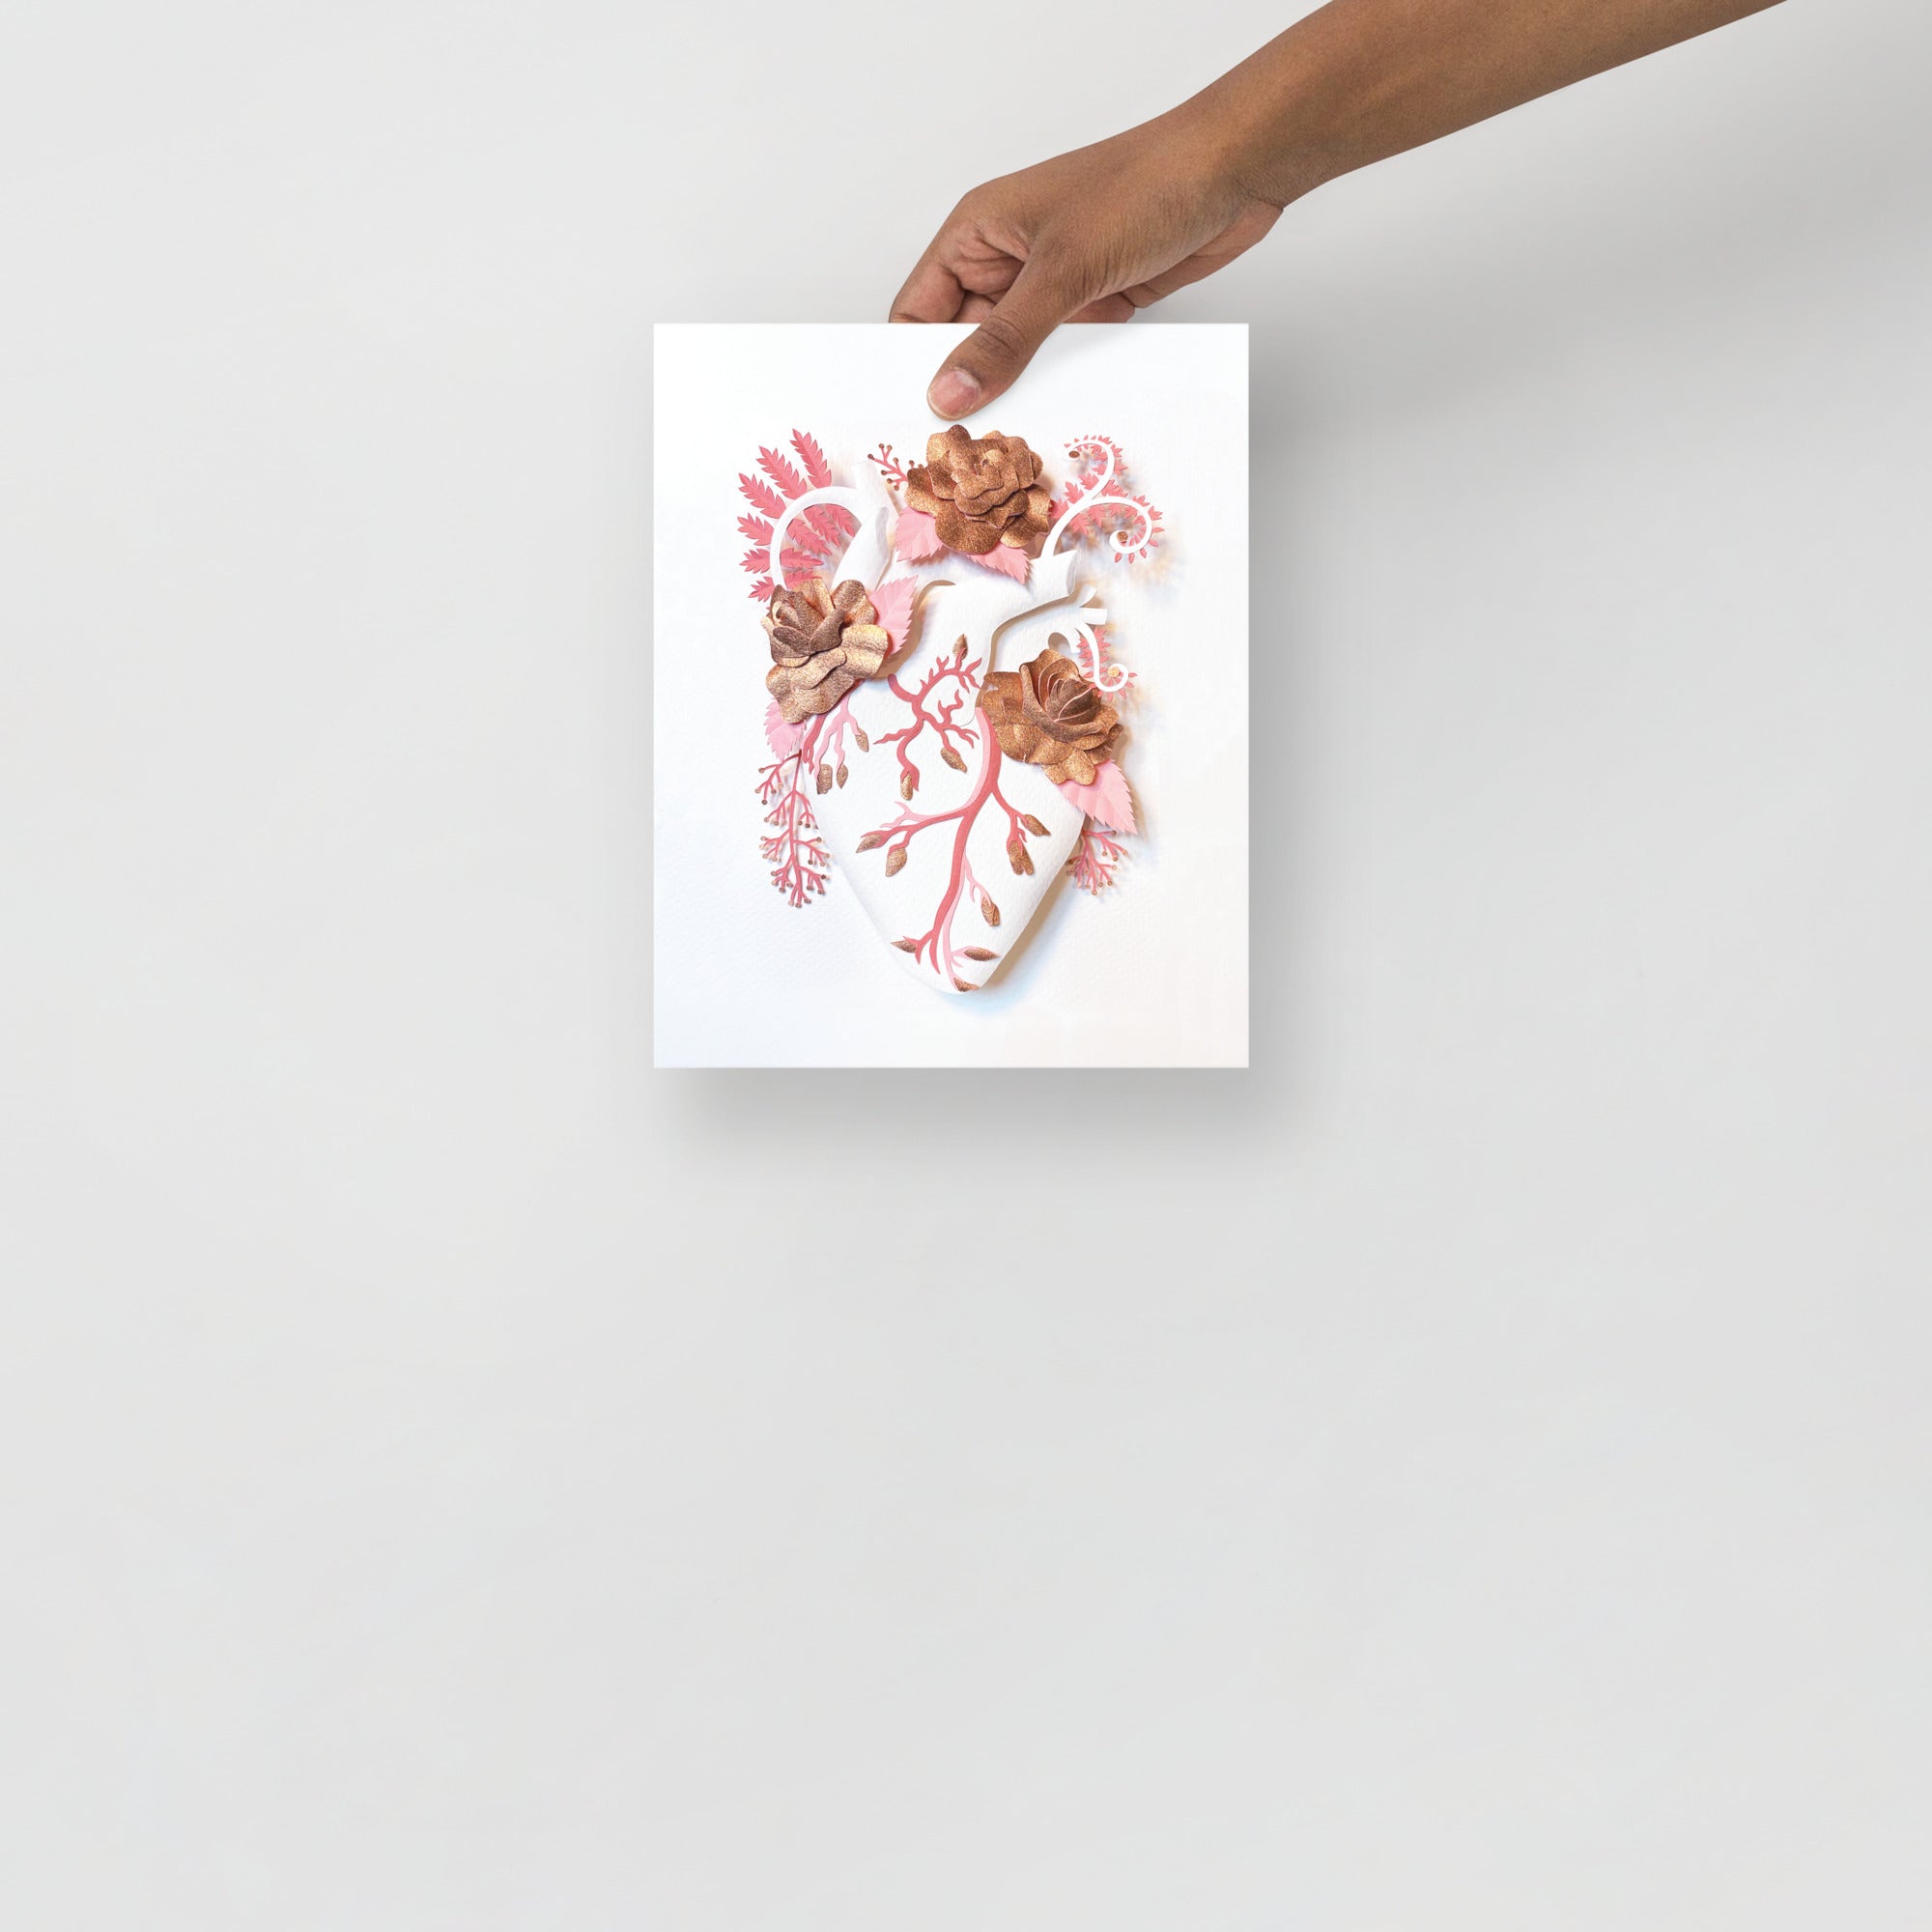 anatomical heart with roses made of hand cut paper